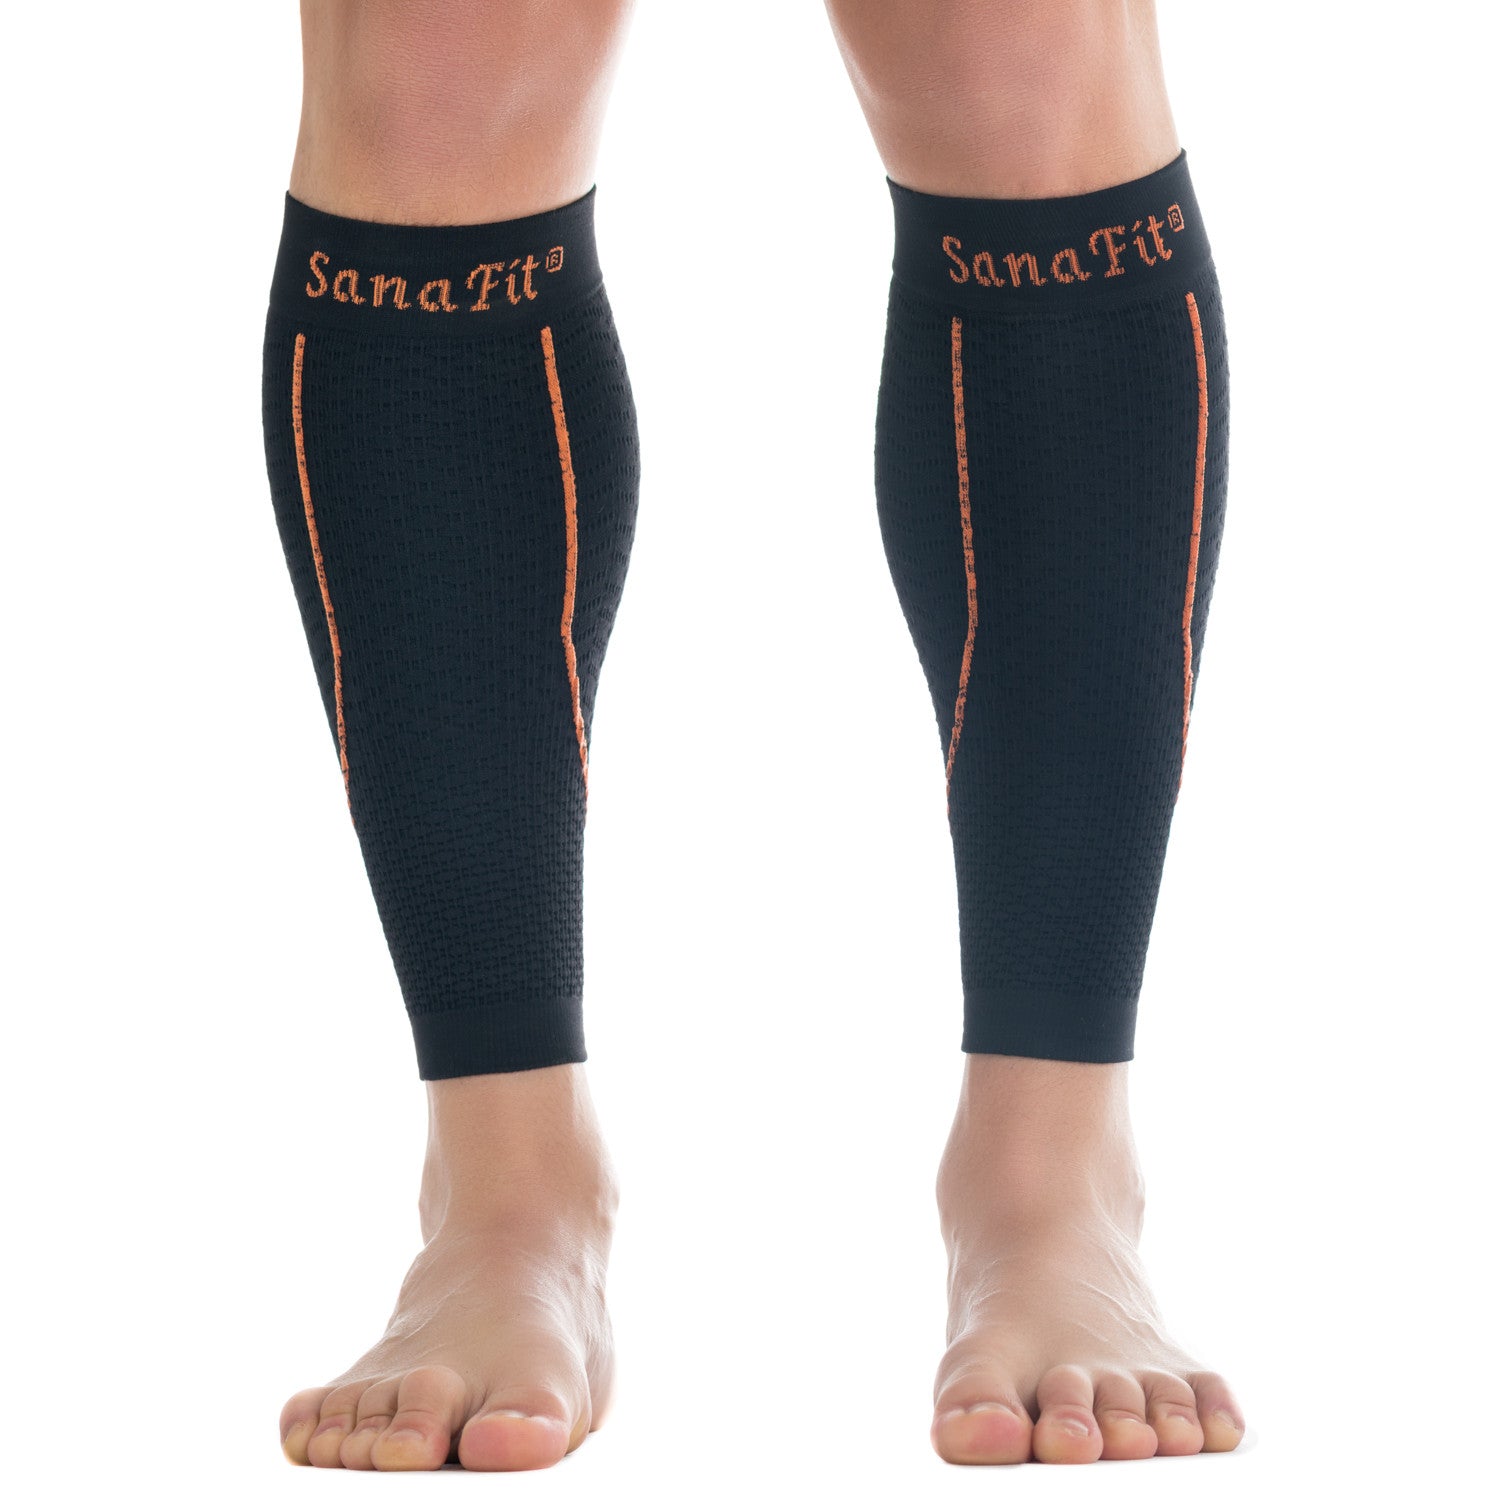 Shin Splint Calf Compression Sleeves Reduce Swelling and Pain – Brace  Professionals